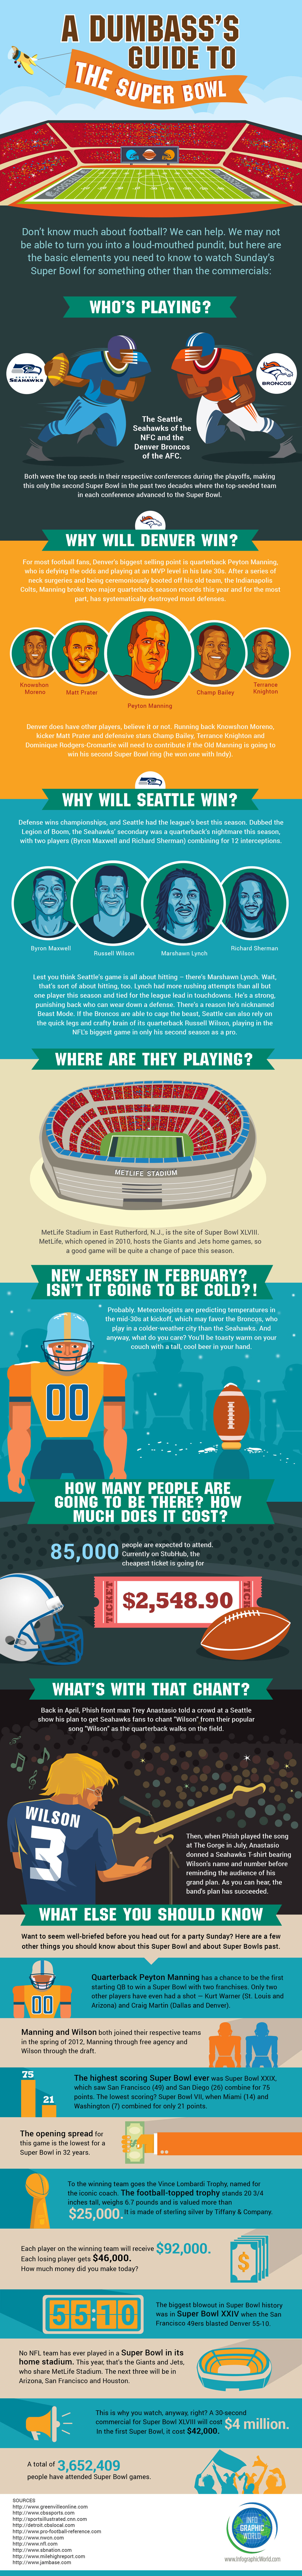 A DUMBASS’S GUIDE TO THE SUPER BOWL